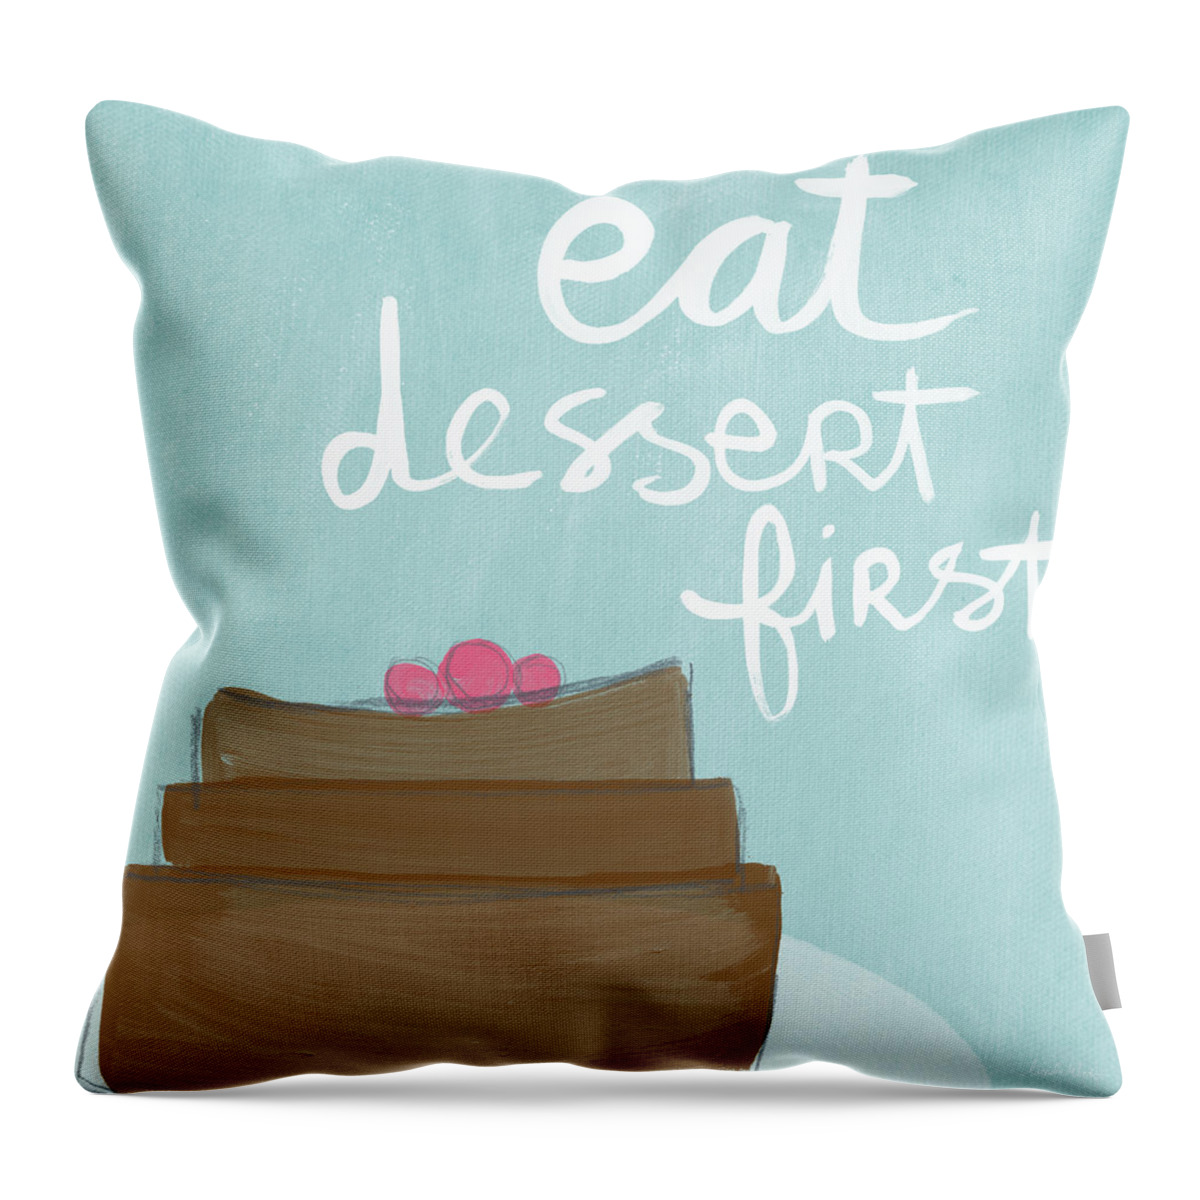 Dessert Throw Pillow featuring the painting Chocolate Cake Dessert First- Art by Linda Woods by Linda Woods